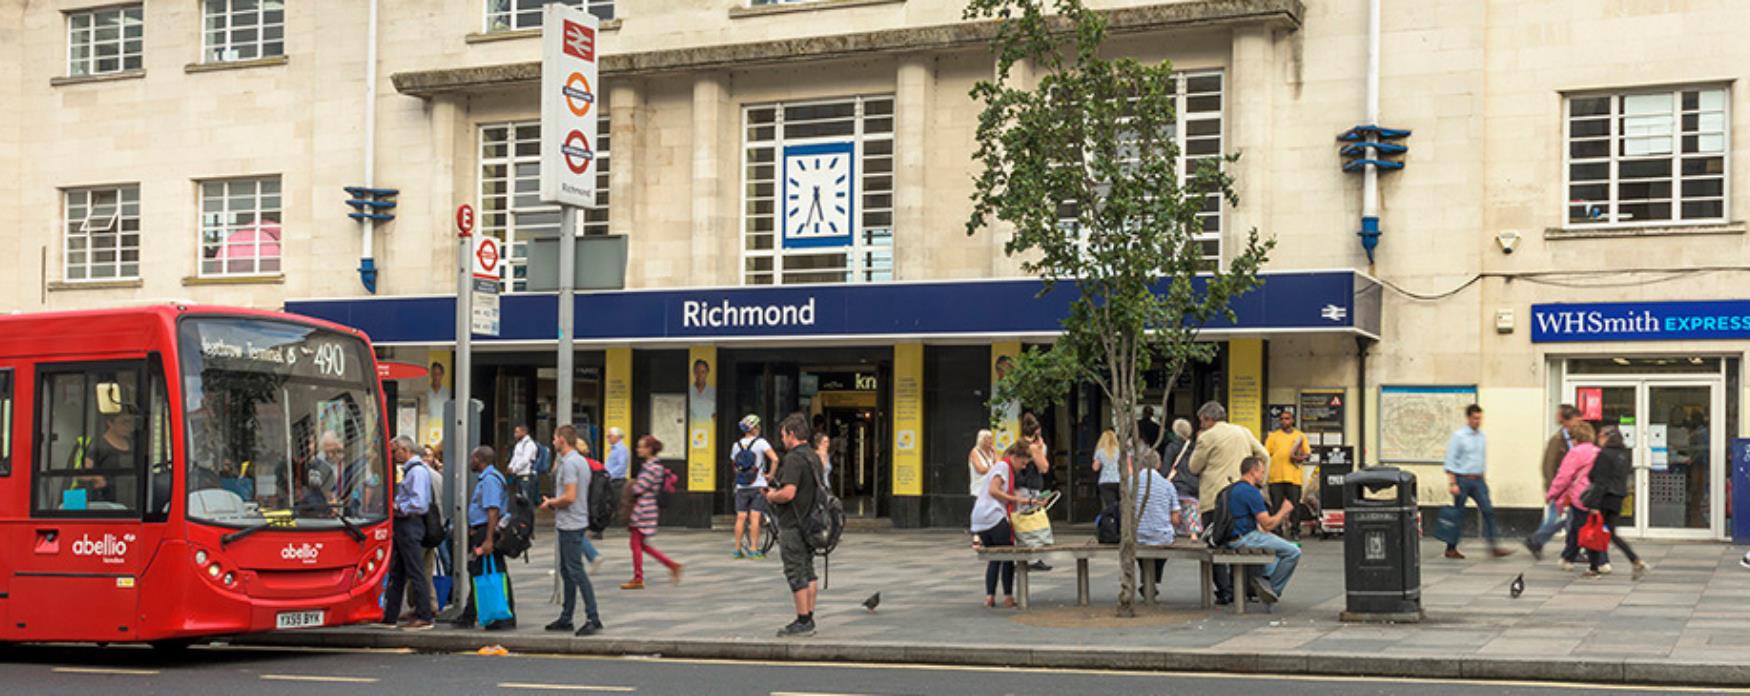 An image of Richmond station during the day